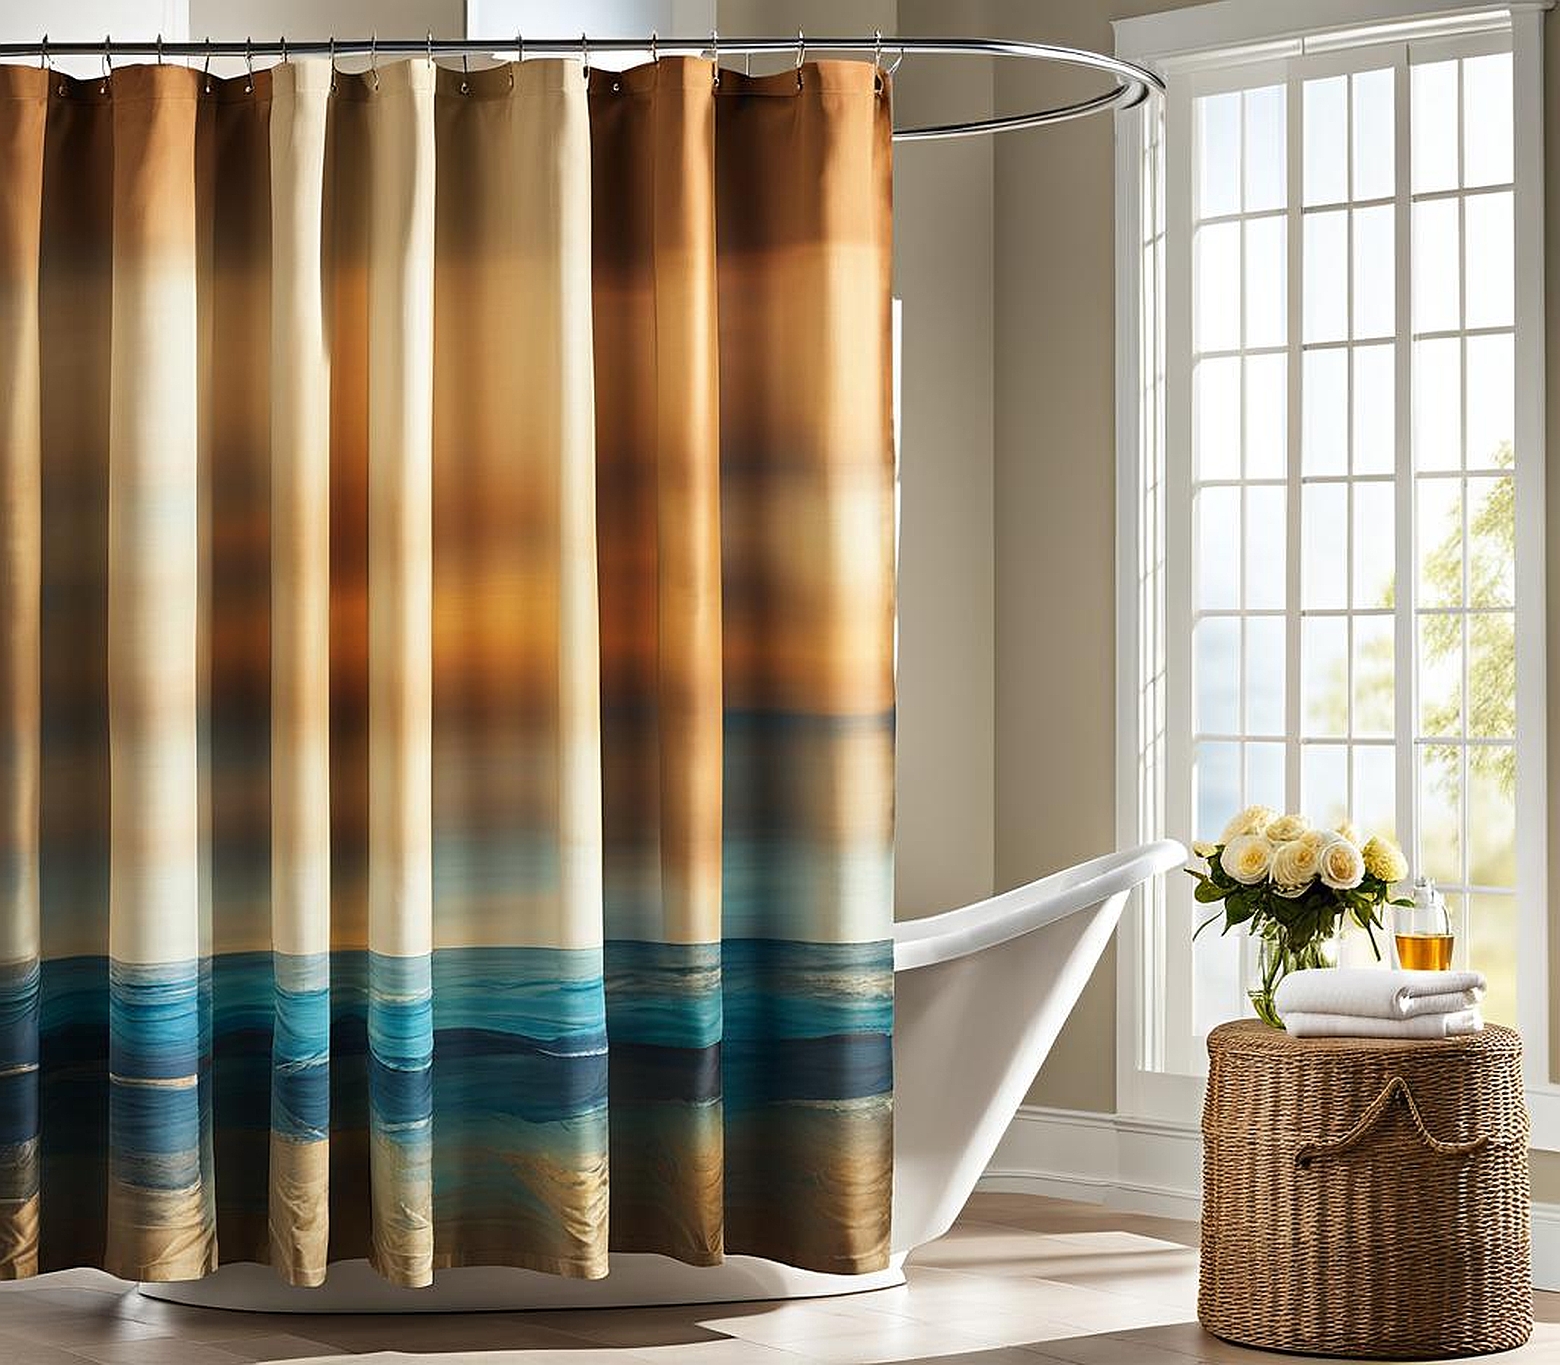 How to Hang Pier One Shower Curtains for a Professional Installation